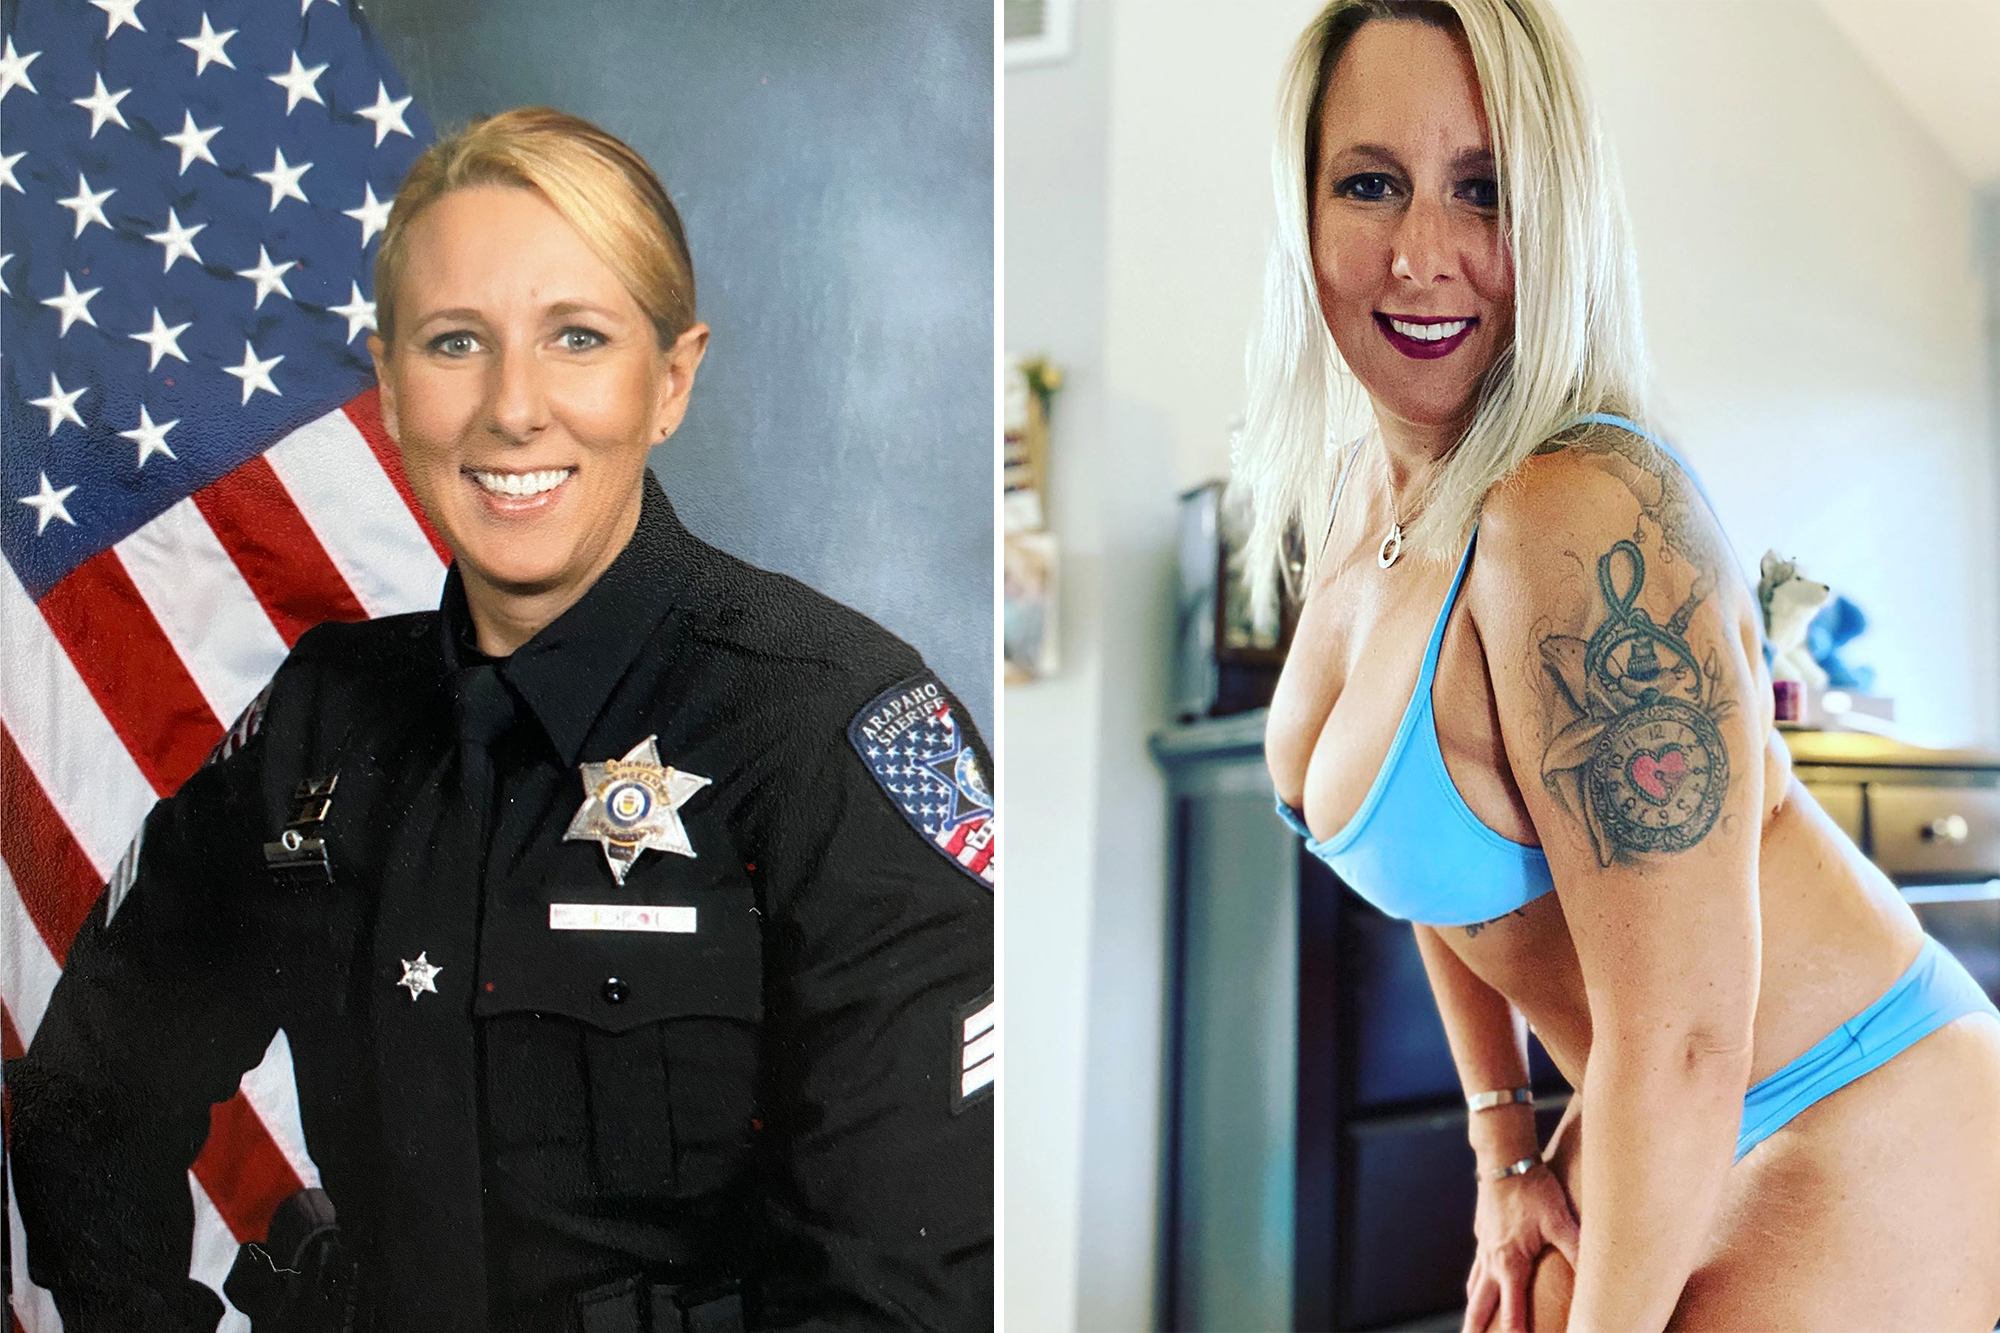 Real Police Woman Nude together xxgasm